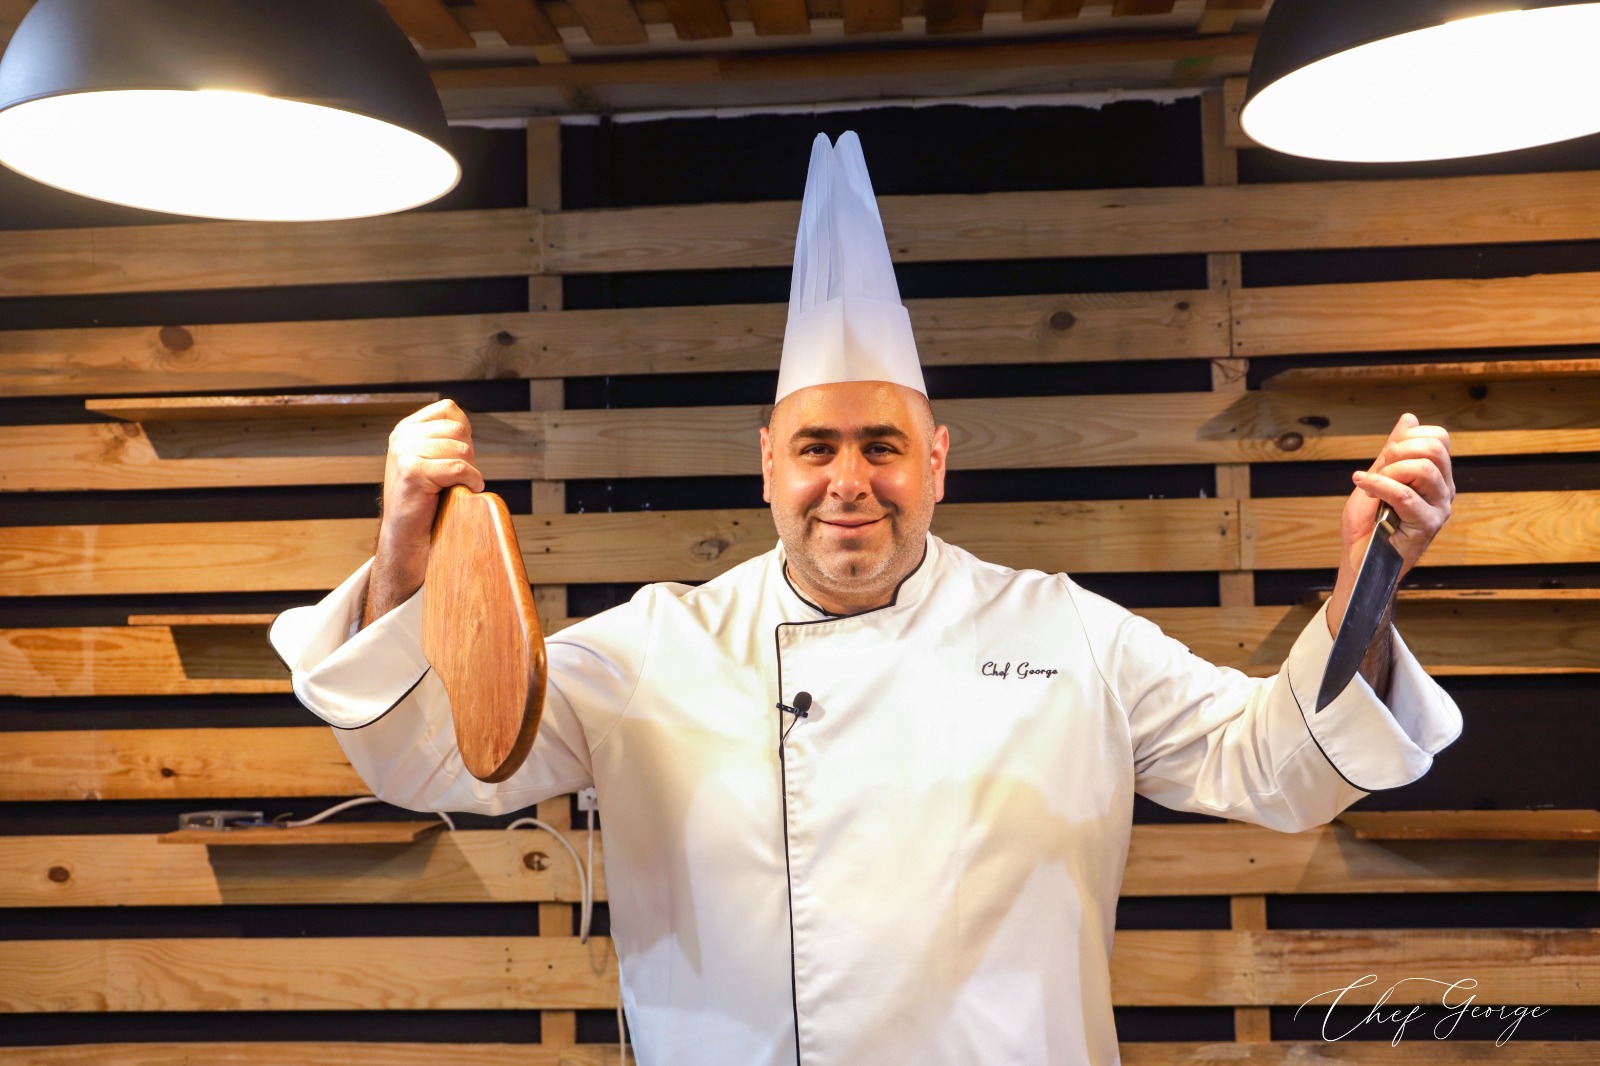 George Ghrayeb The Lebanese Talented Chef With More Than 20 Years Of Experience